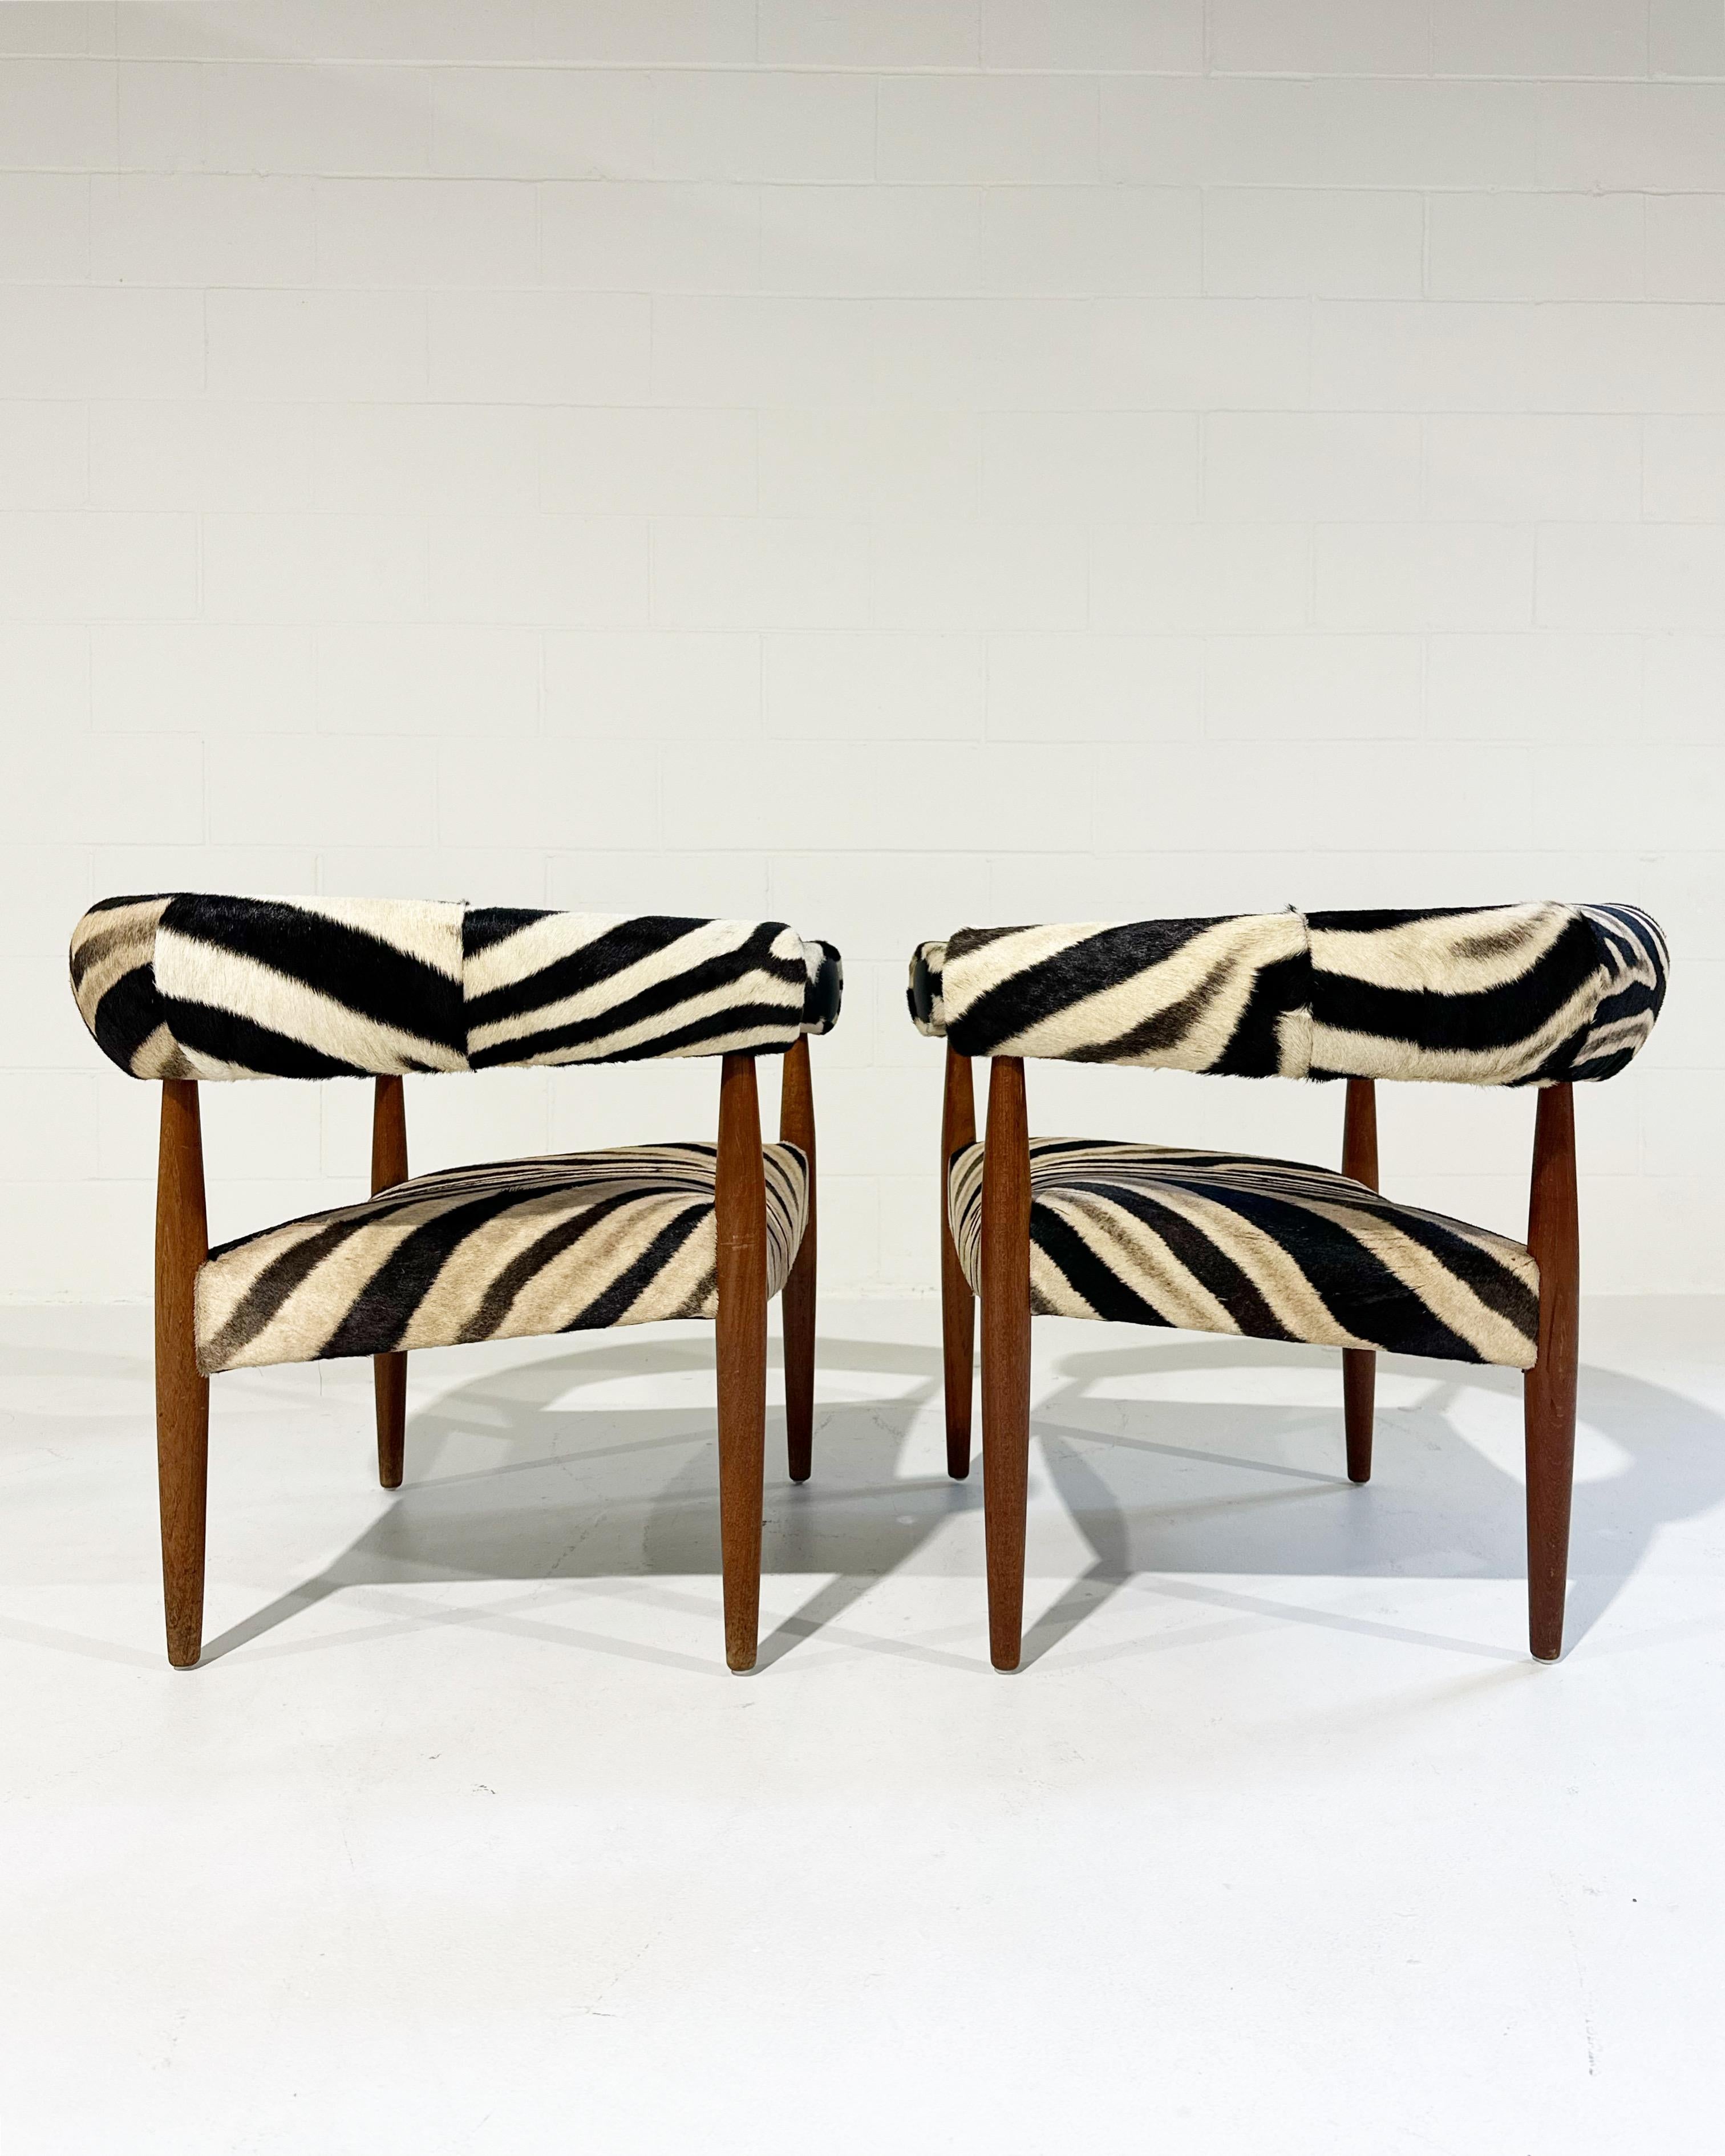 Vintage Nanna and Jorgen Ditzel Ring Lounge Chairs in Zebra Hide For Sale 1